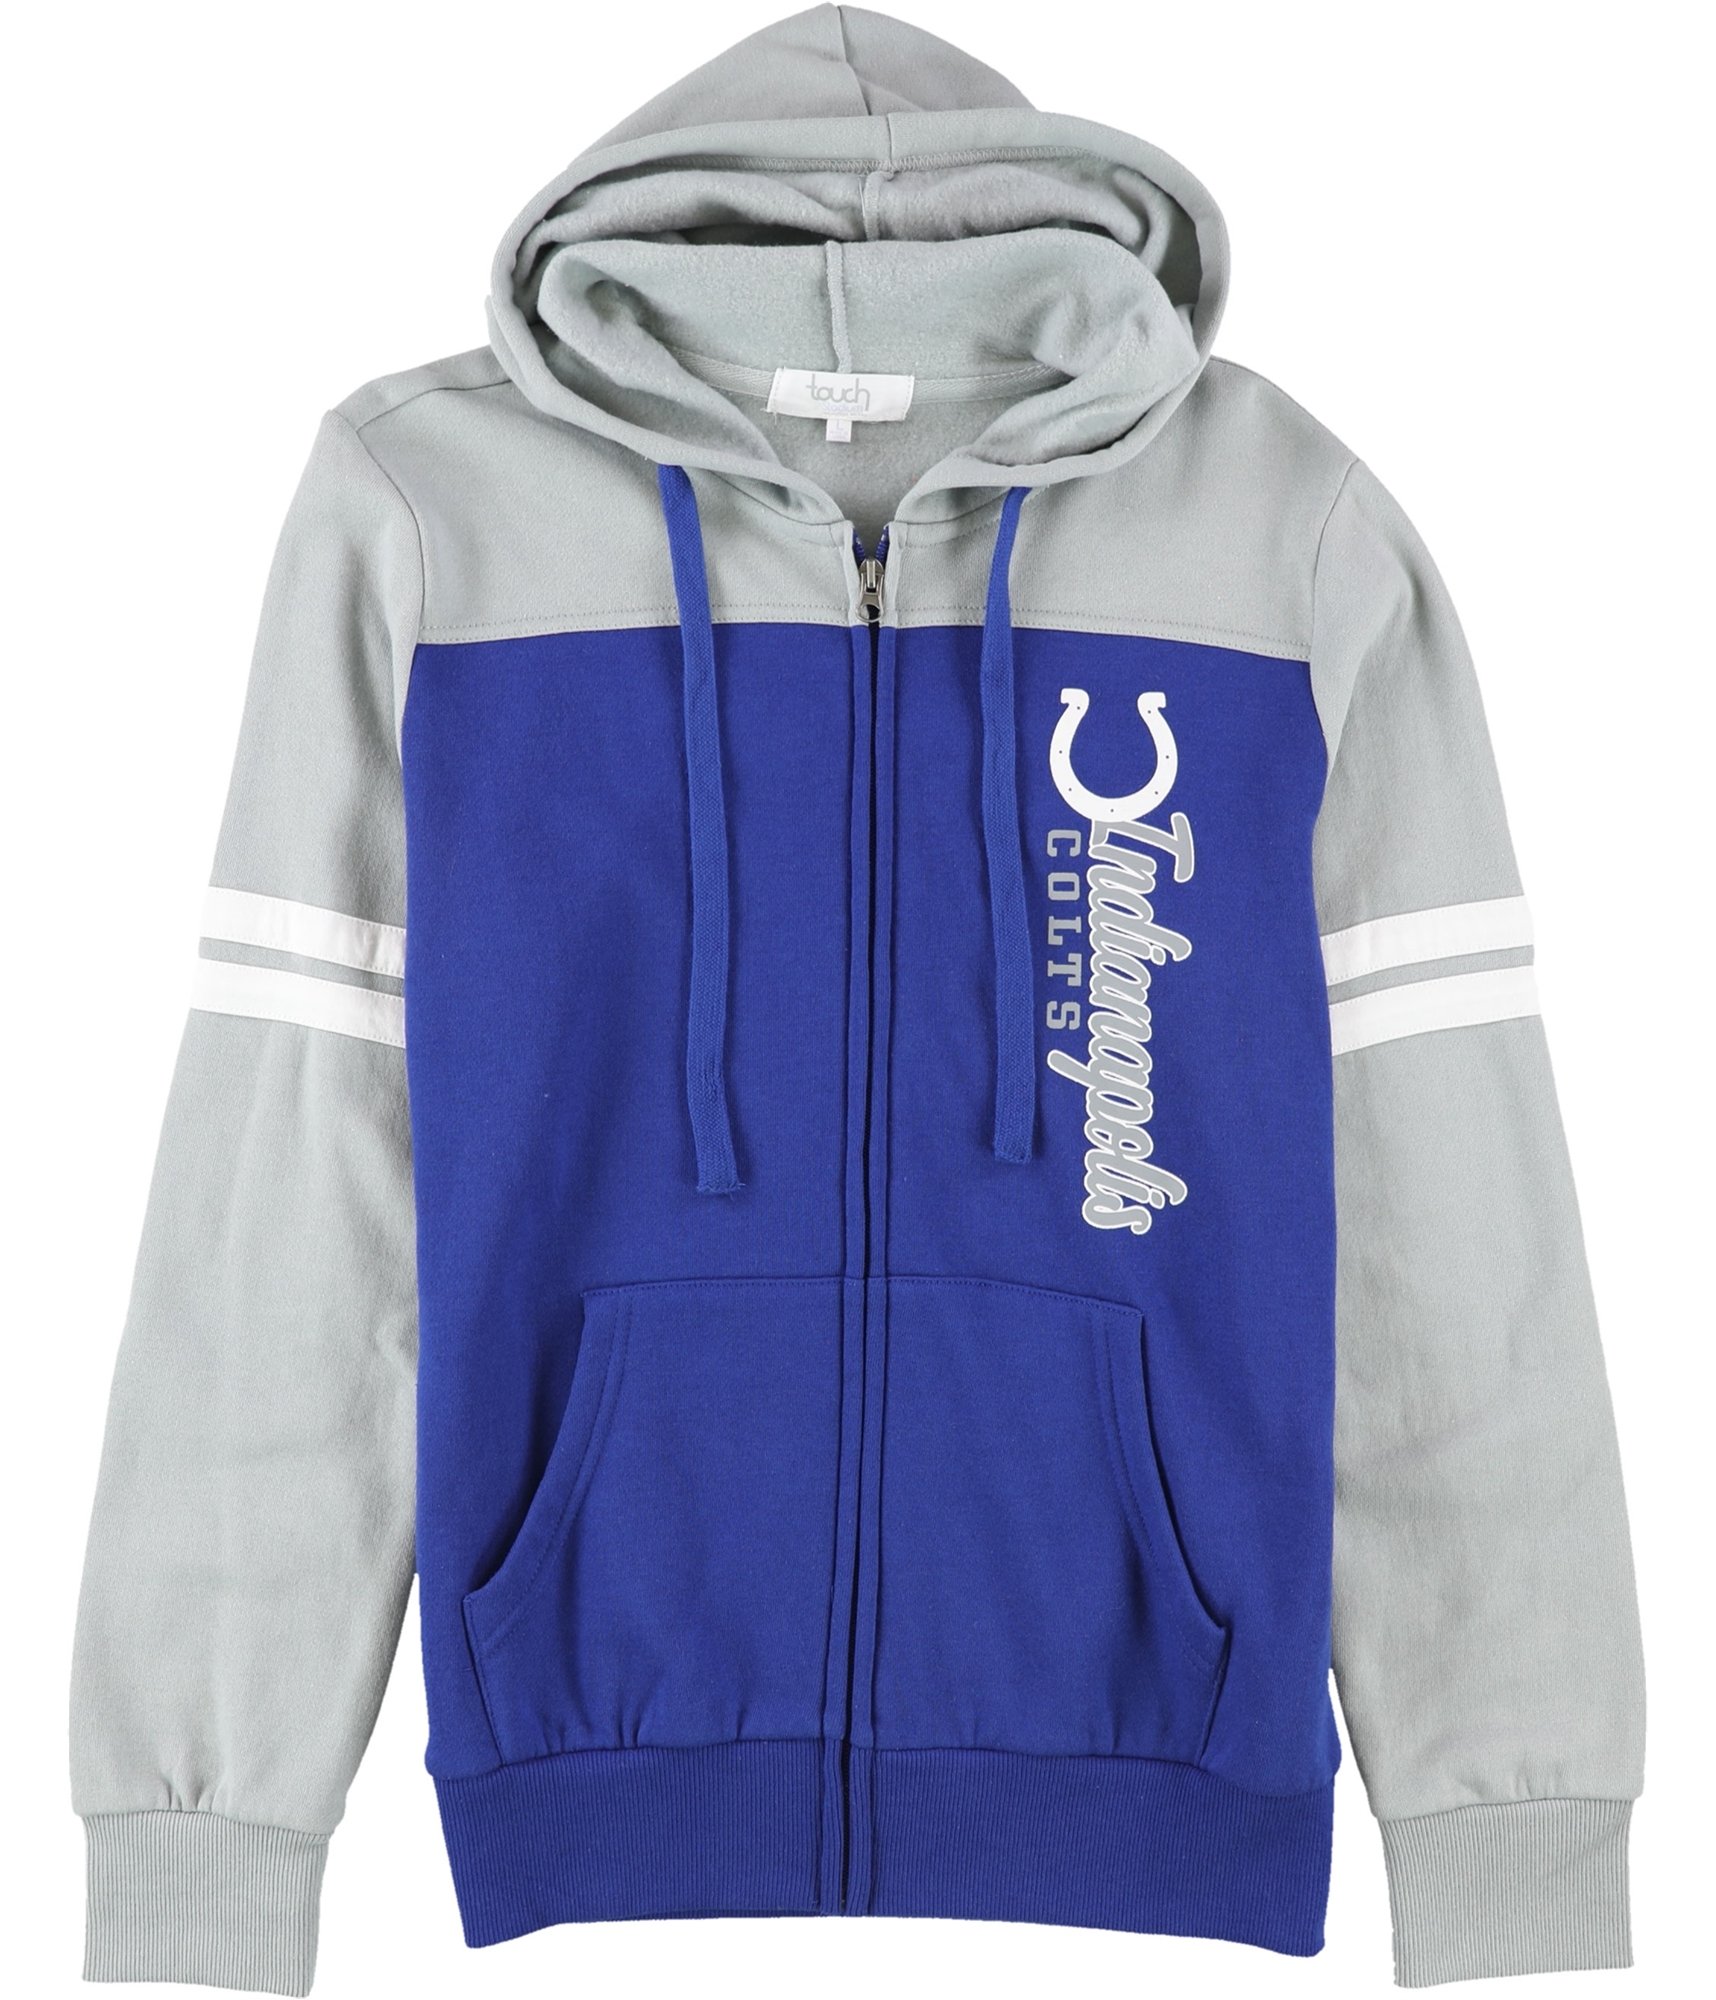 Touch Womens Indianapolis Colts Hoodie Sweatshirt, Blue, Small